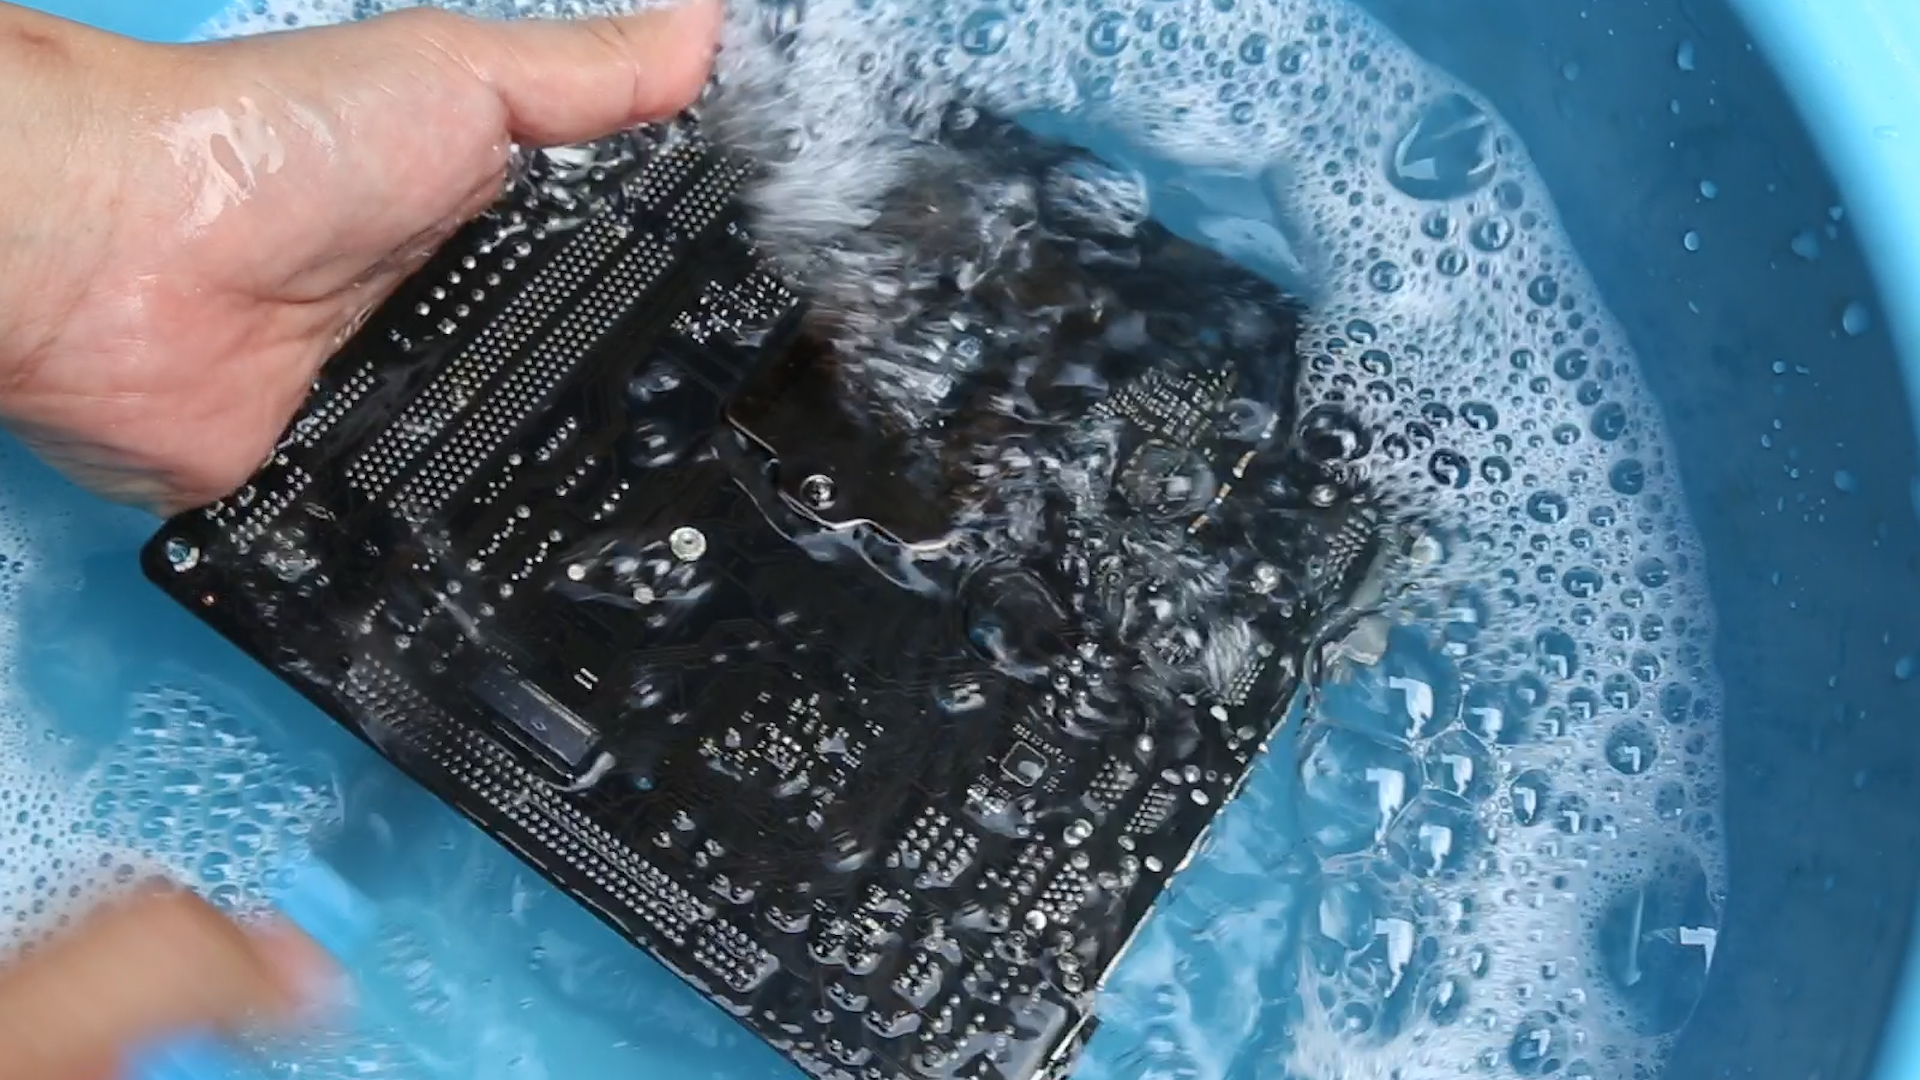 Cleaning mainboard 14